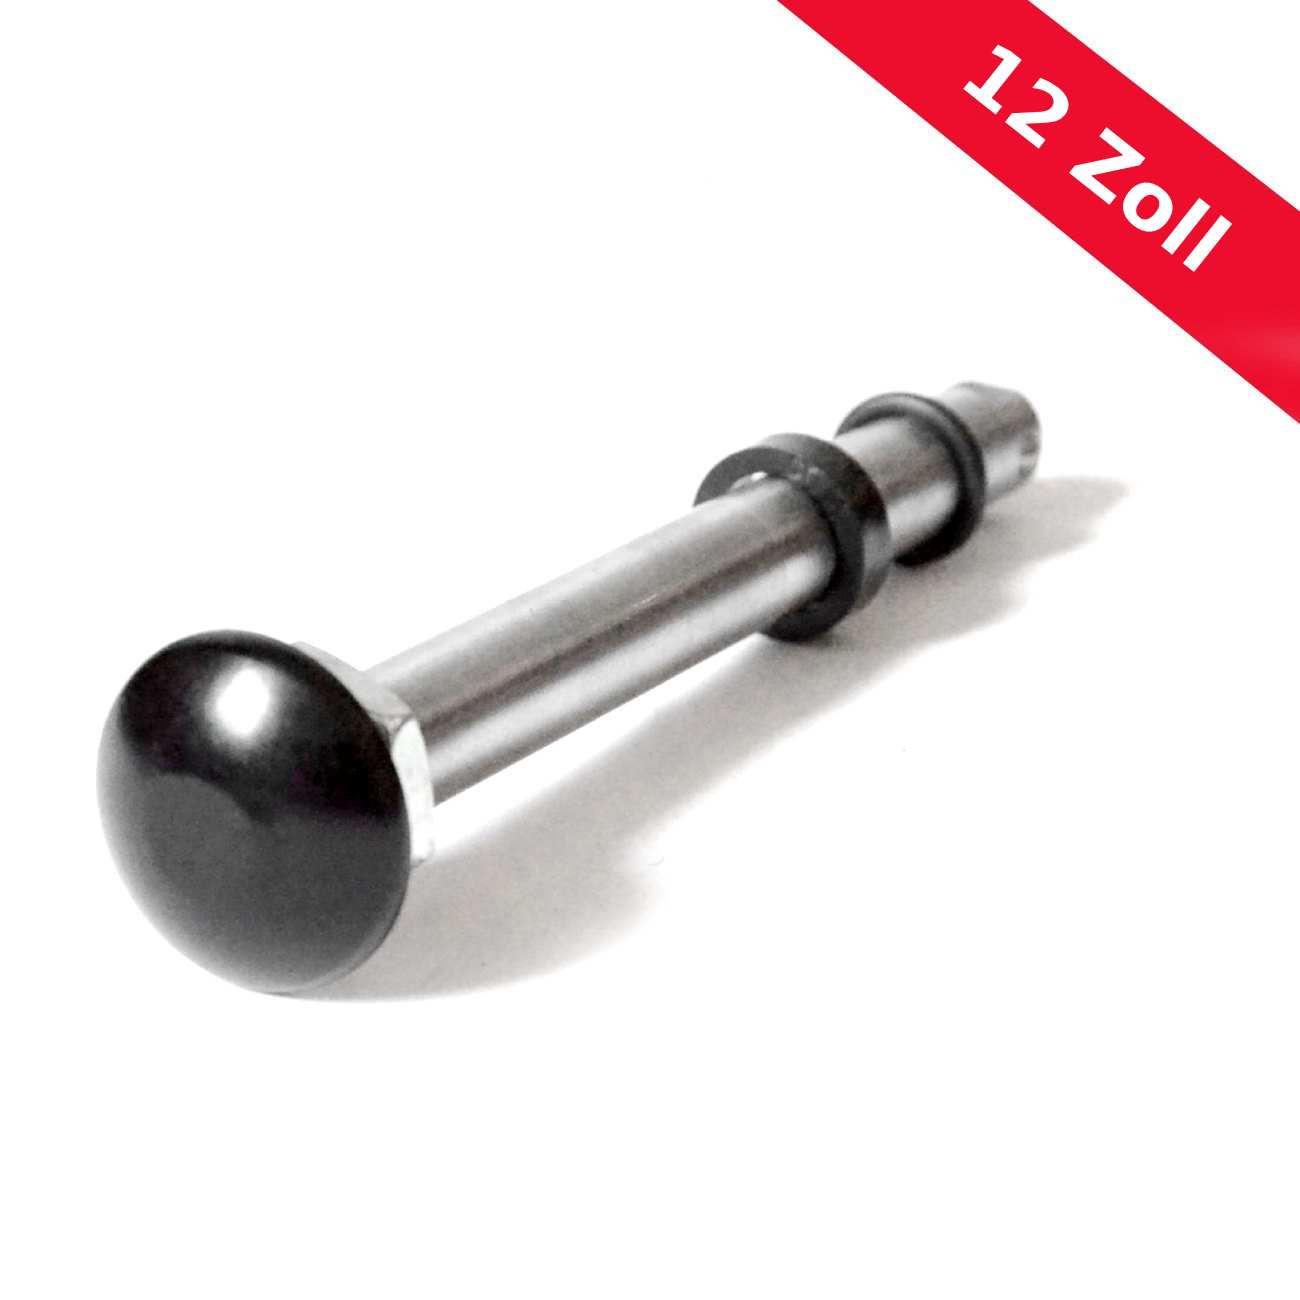 Special: Thru axle 12mm for 12 inch wheel  (axle system 12/20)